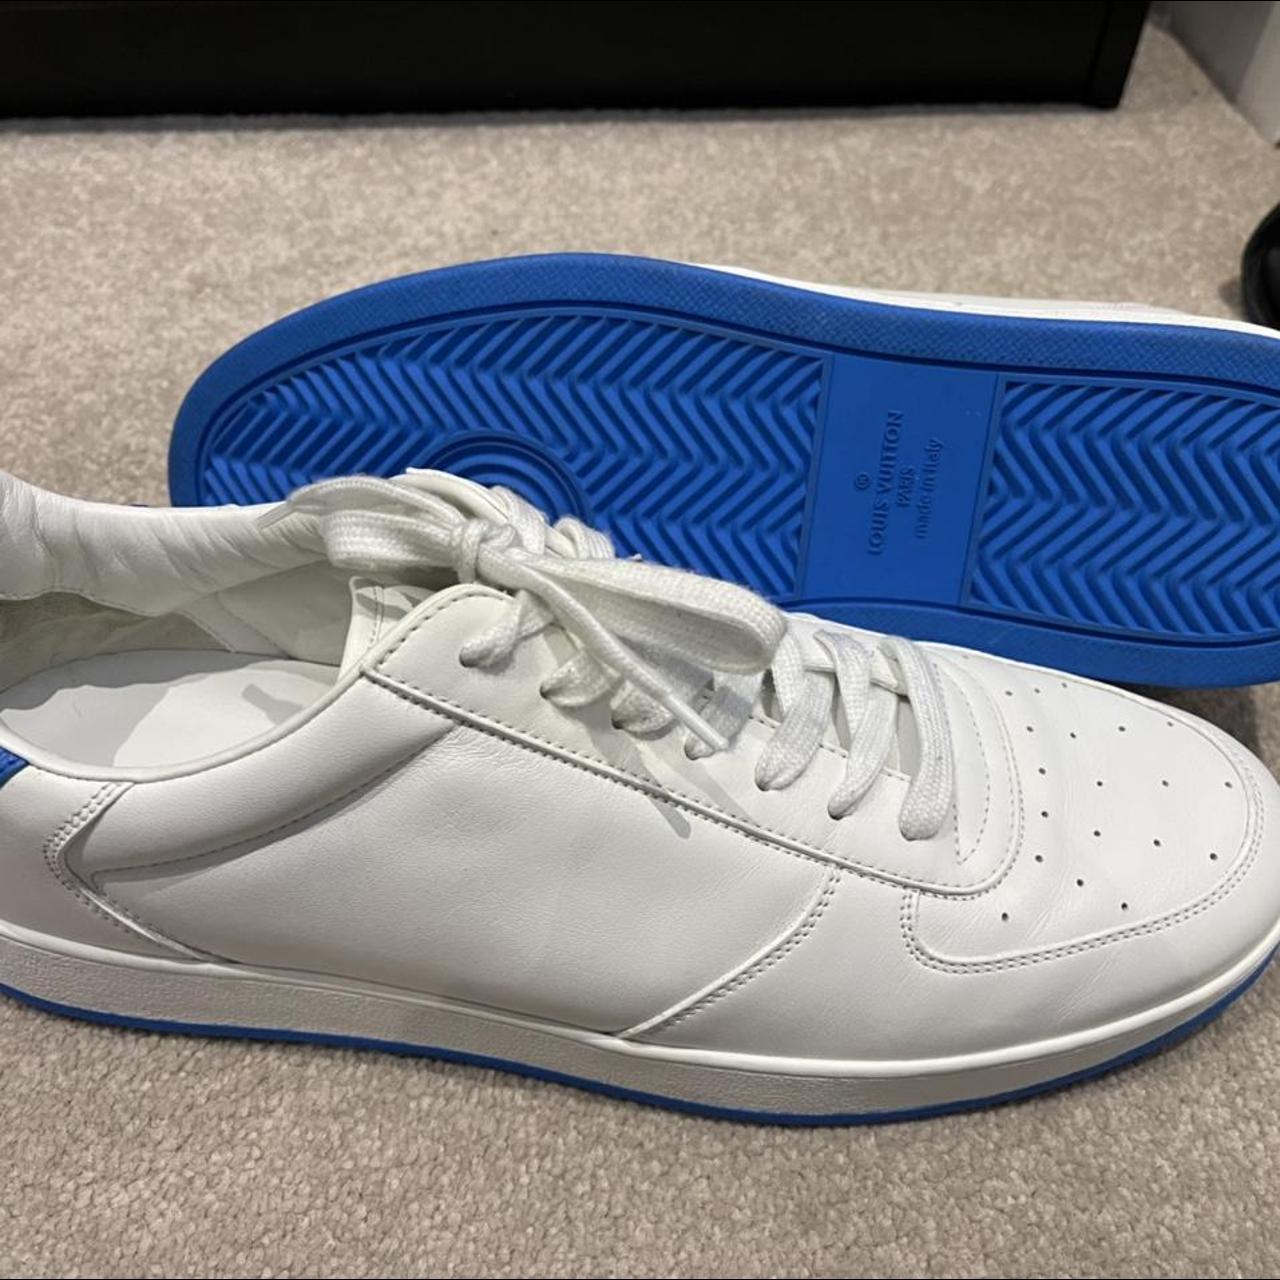 Buy LOUIS VUITTON Louis Vuitton MS0137 Rivoli Line Leather Sneakers  Monogram White 8.5 [Good Condition] [Used] from Japan - Buy authentic Plus  exclusive items from Japan